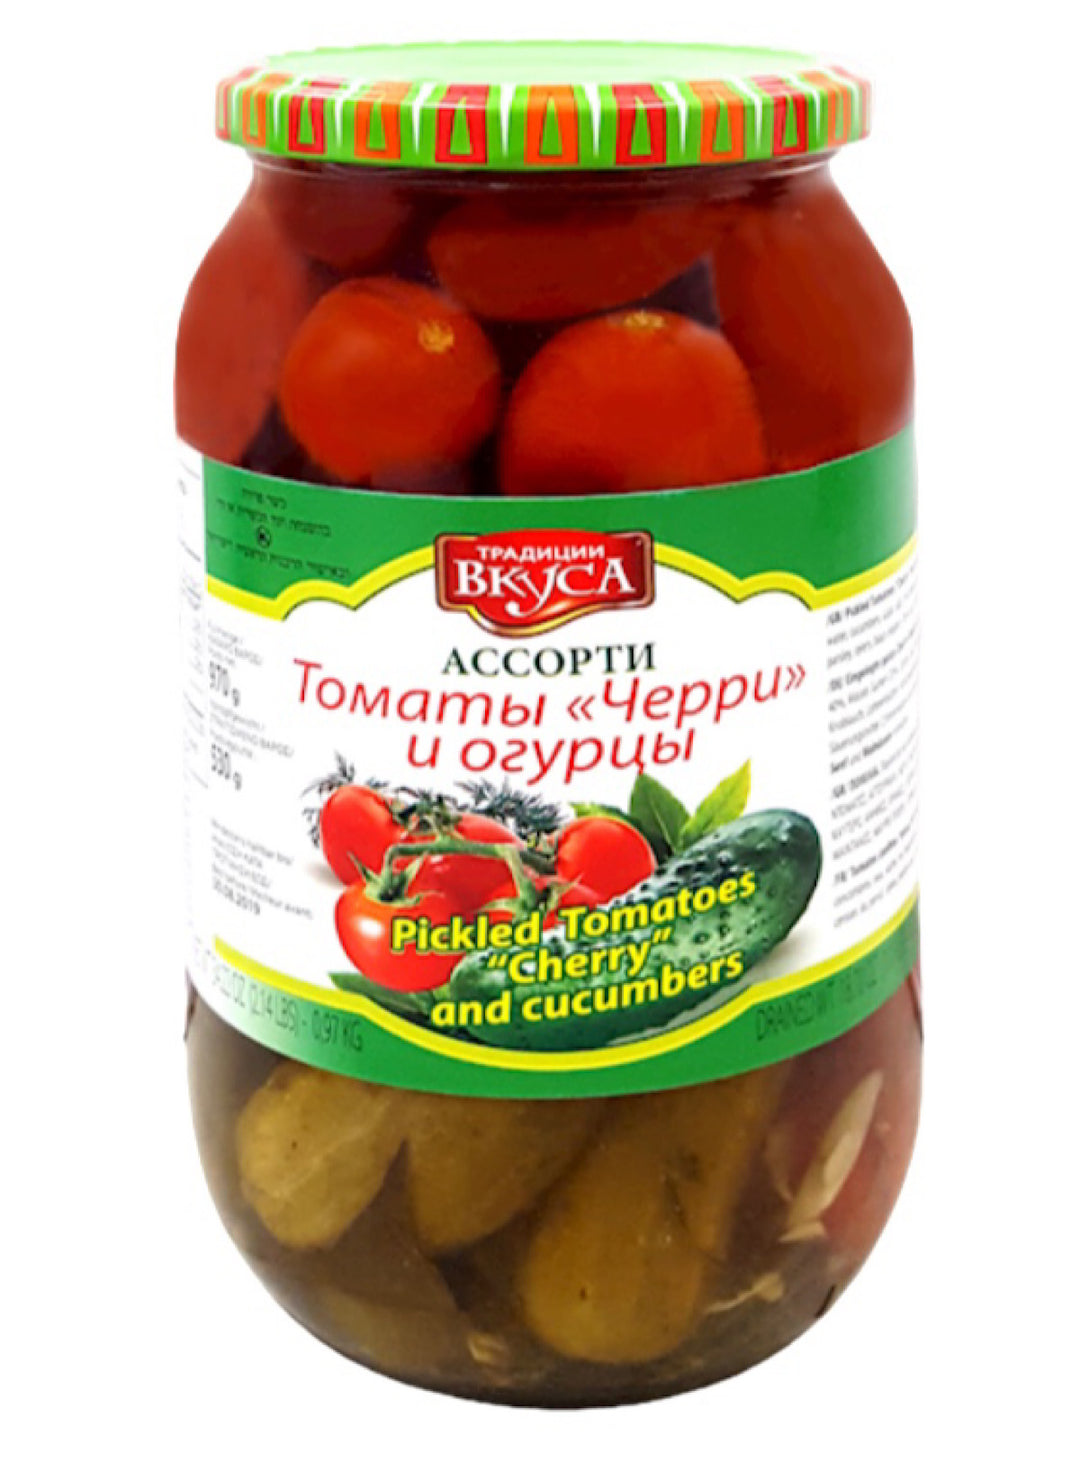 Cherry Tomatoes and Cucumbers Pickled - Tradicll - 1 Liter